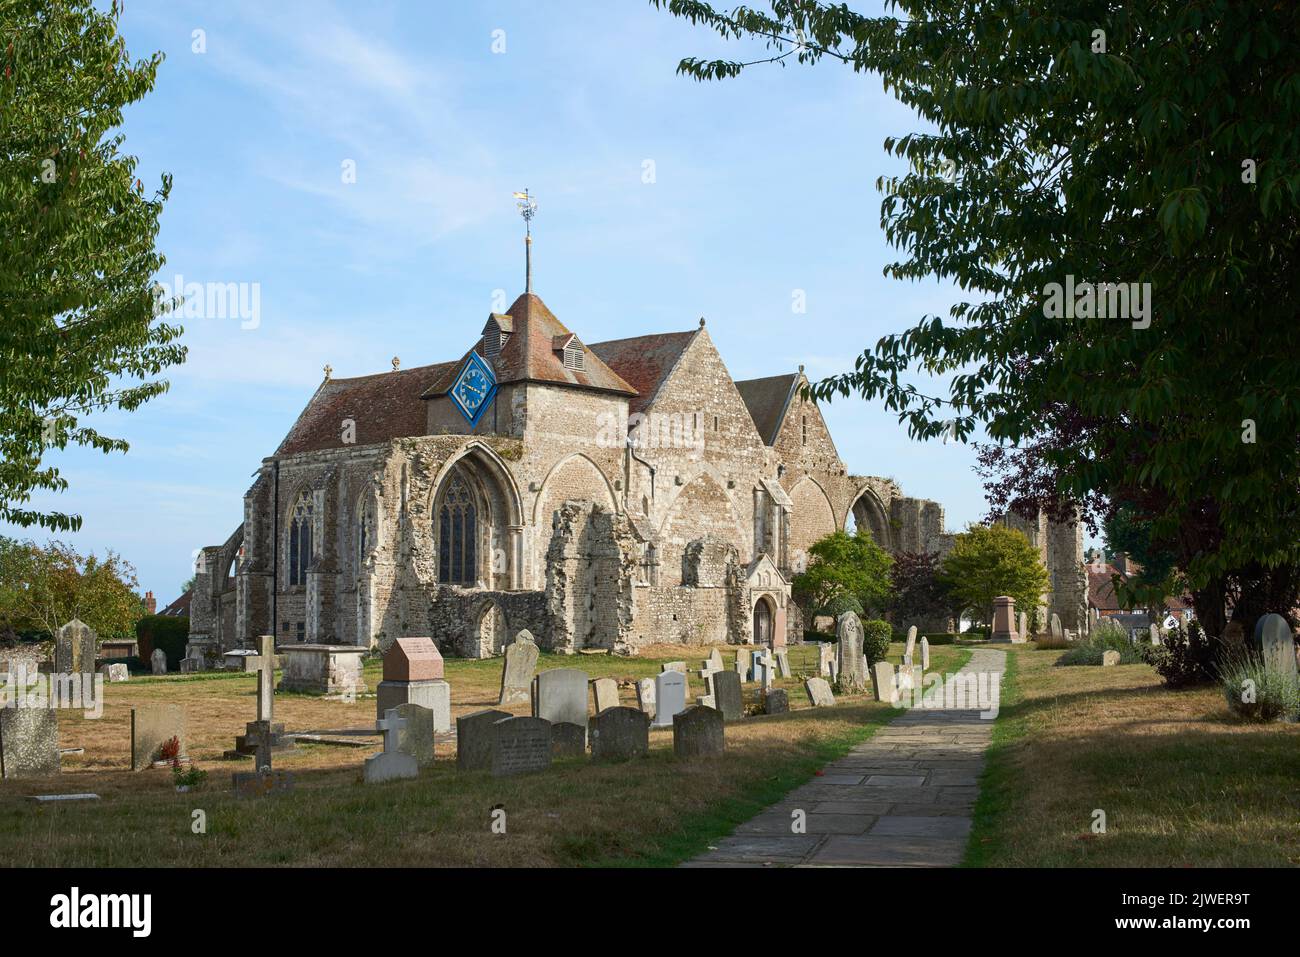 The ancient church of St Thomas the Martyr in the historic town of Winchelsea, East Sussex, UK Stock Photo